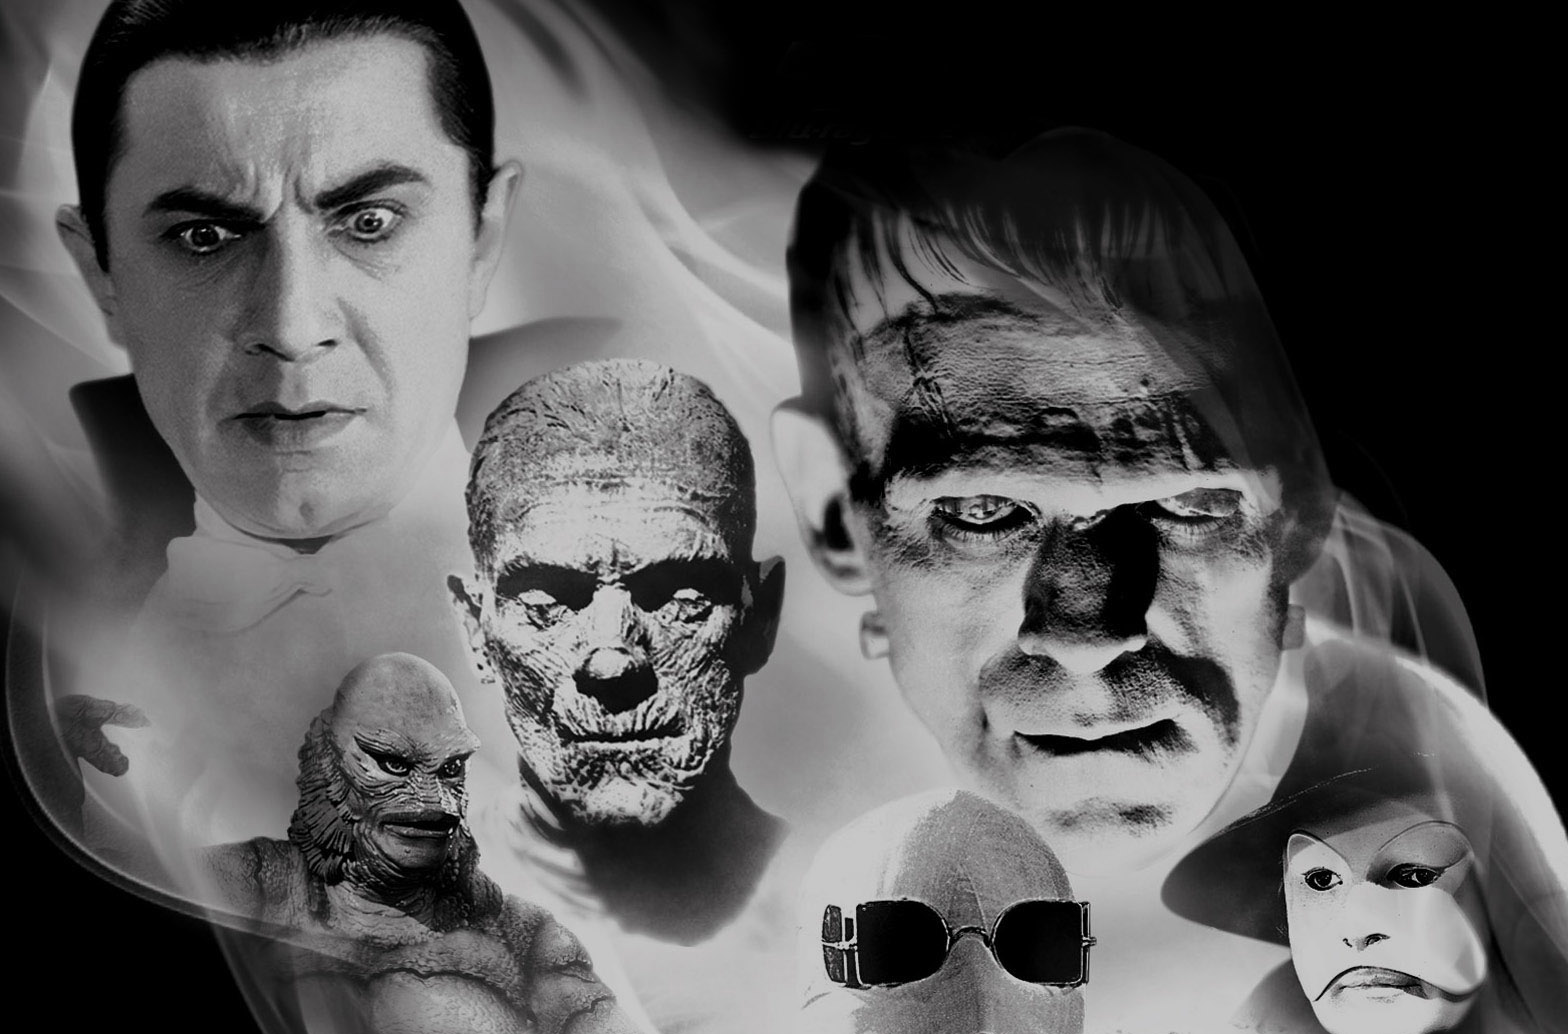 Universal to Resurrect Classic Movie Monsters in Marvel Style ...